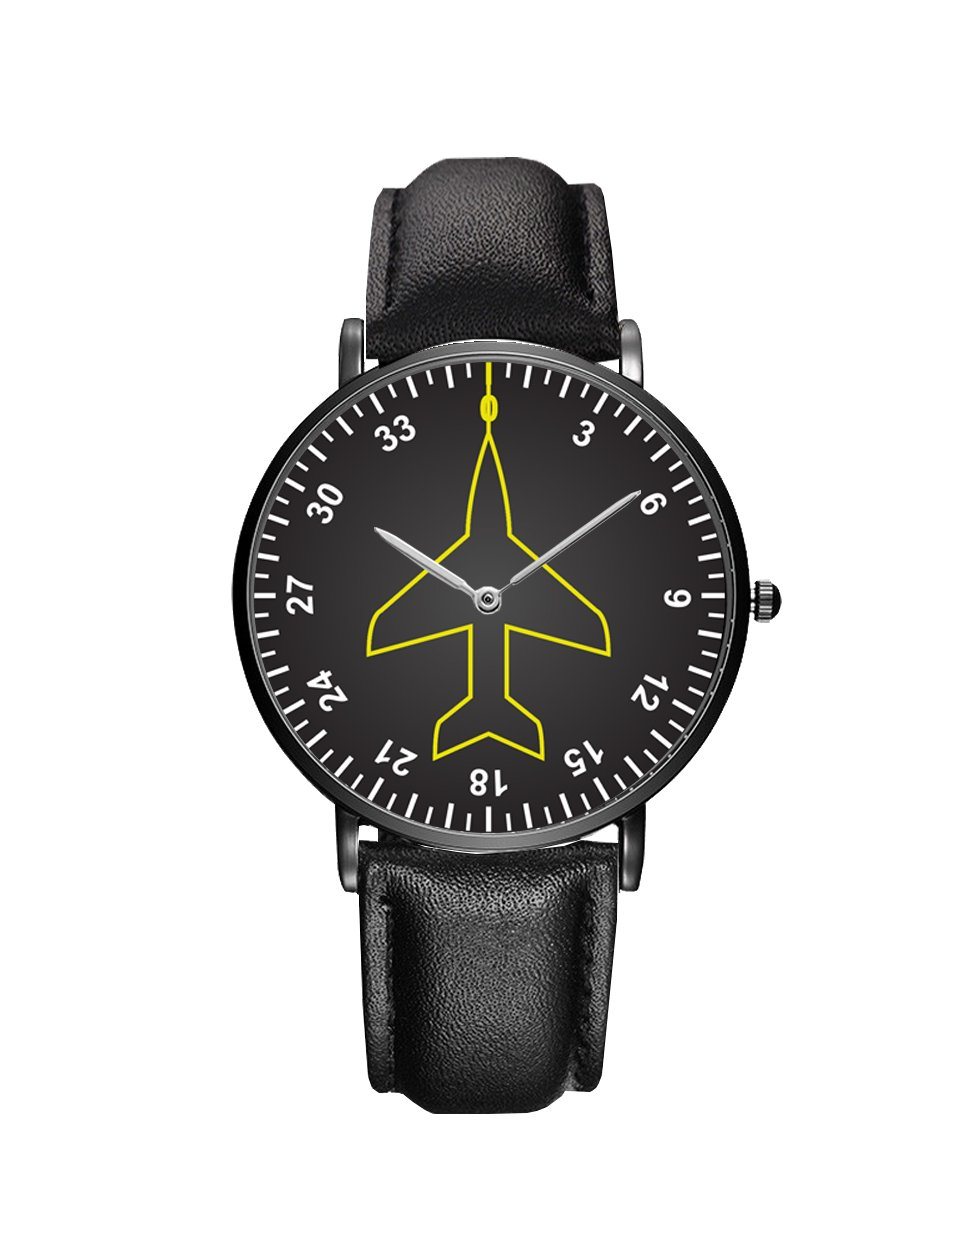 Airplane Instrument Series (Heading) Leather Strap Watches Pilot Eyes Store Black & Brown Leather Strap 